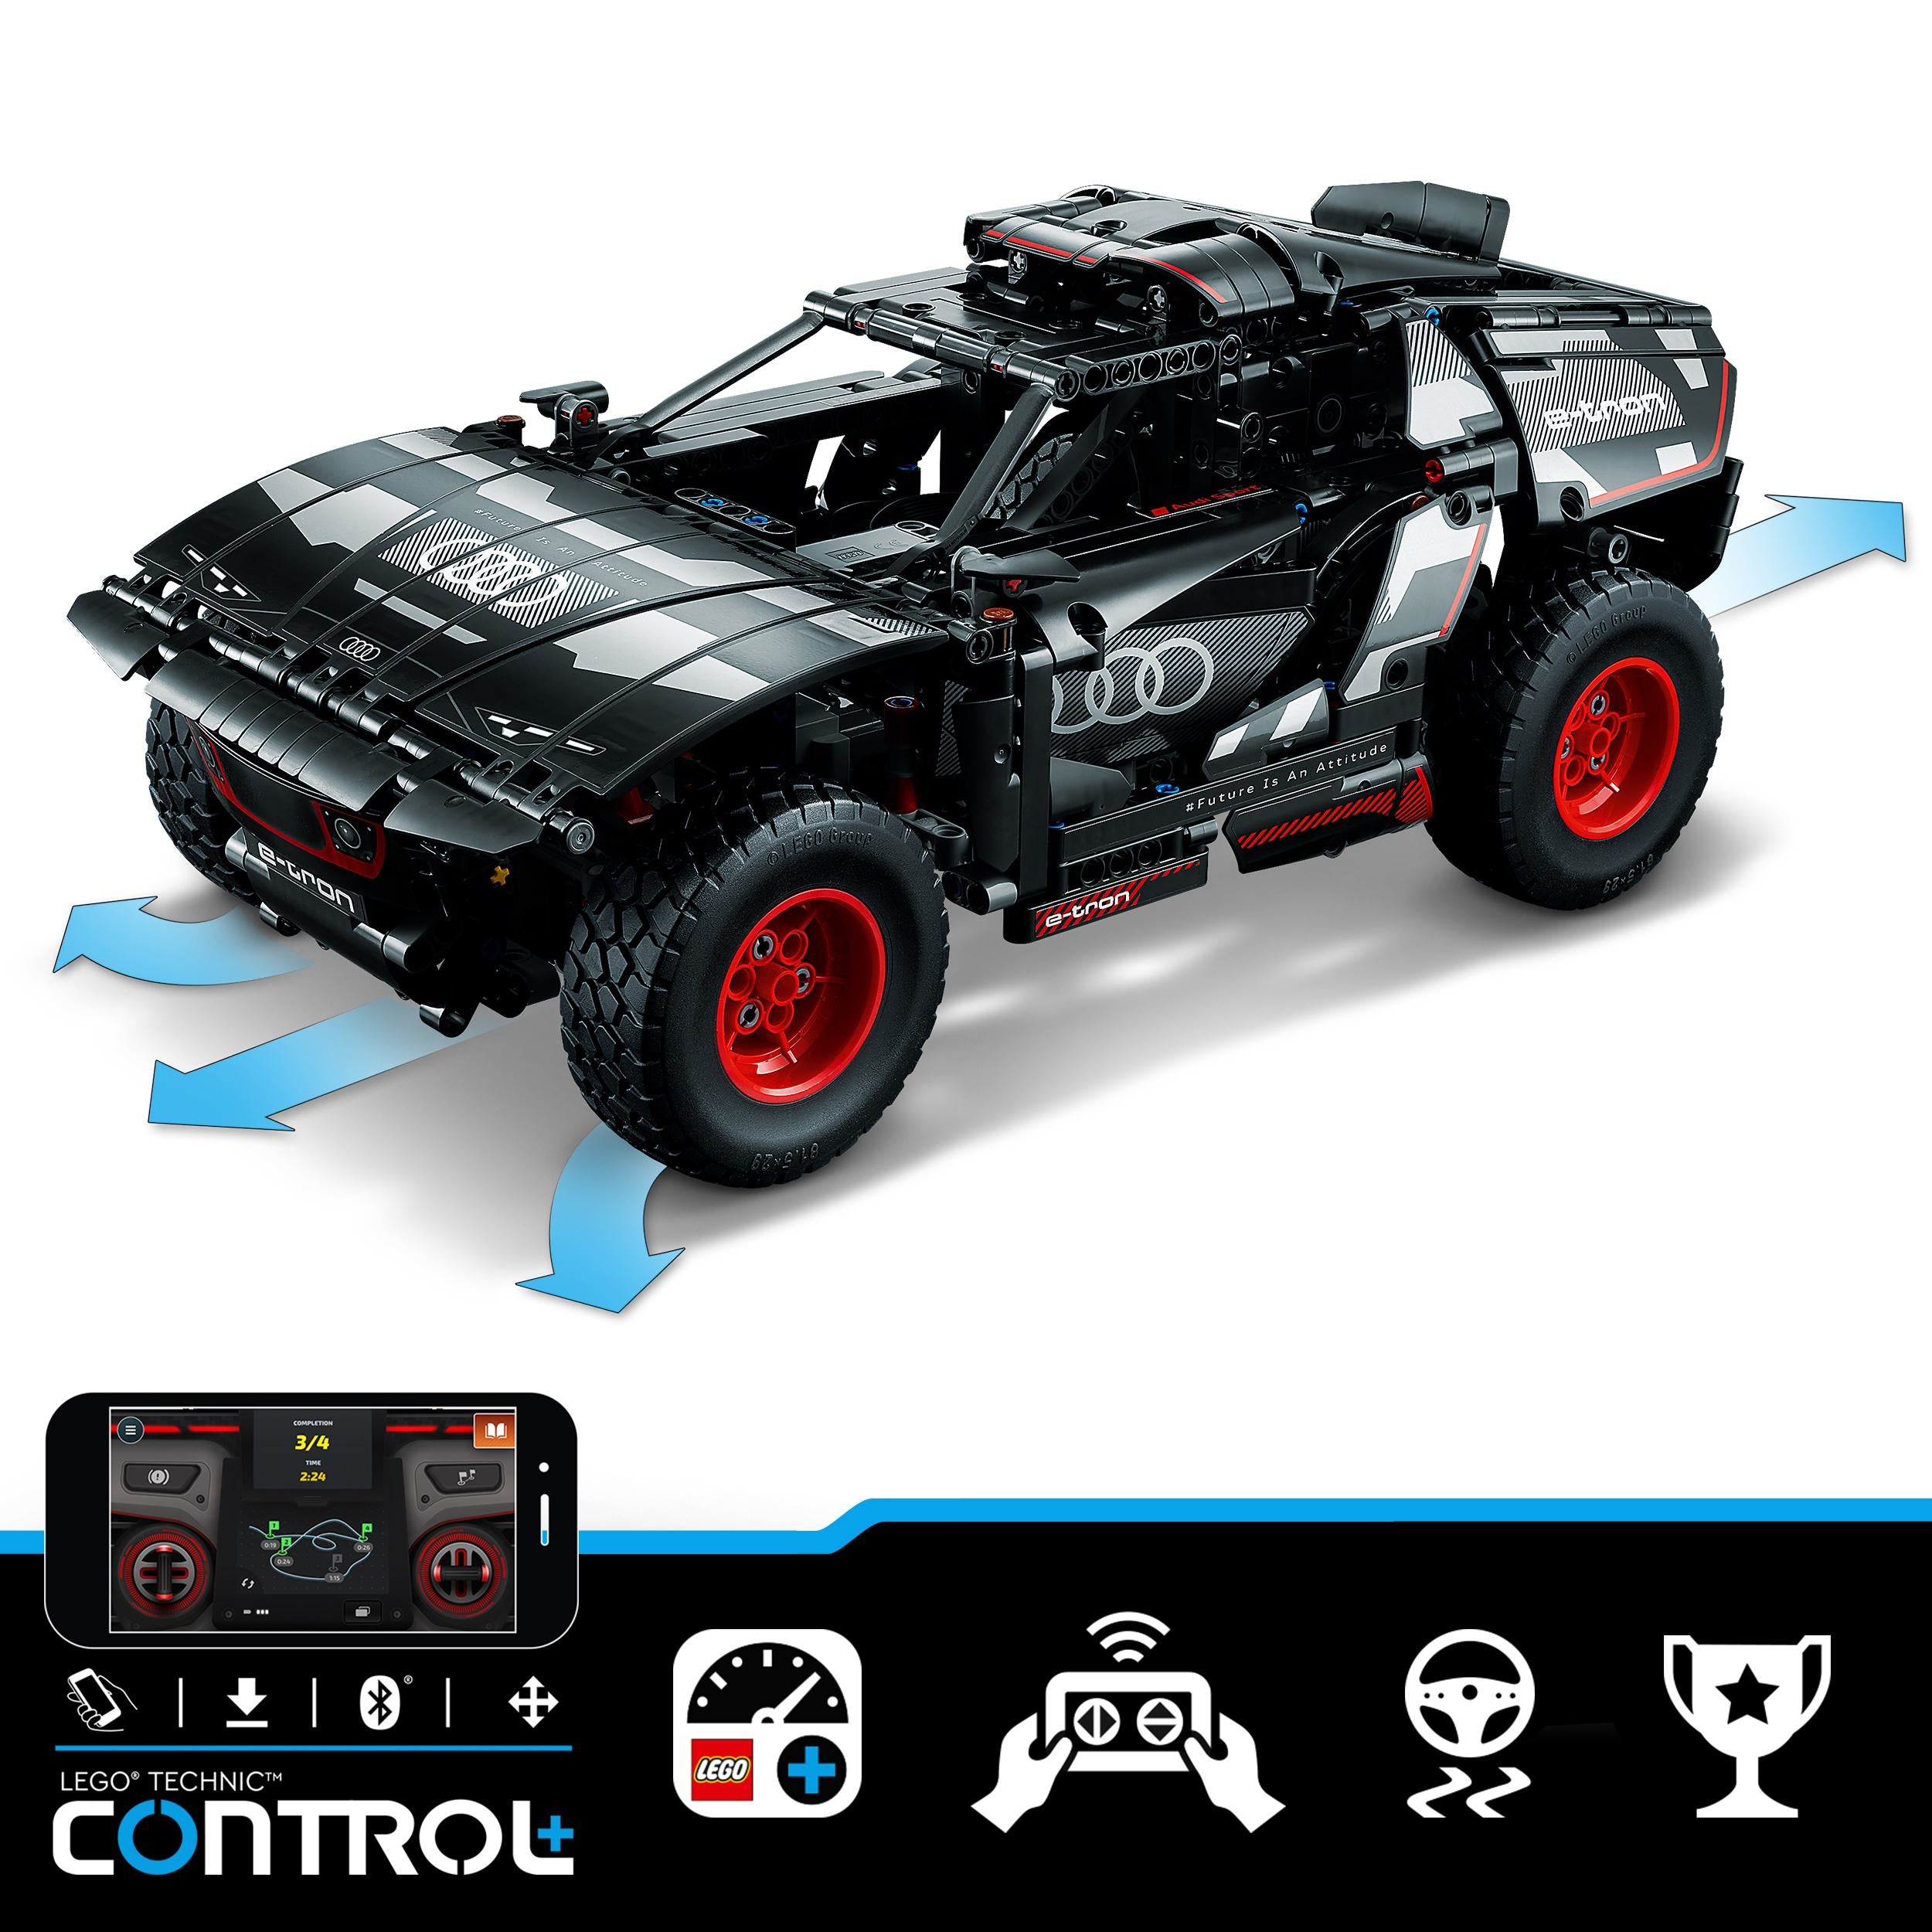 LEGO 42160 Technic Audi RS Q e-tron Remote Control Rally Car Toy, Dakar Rally Off-Road Car Model, App-Controlled RC with CONTROL+, Gift Idea for Boys, Girls and Fans Aged 10 Plus to Build